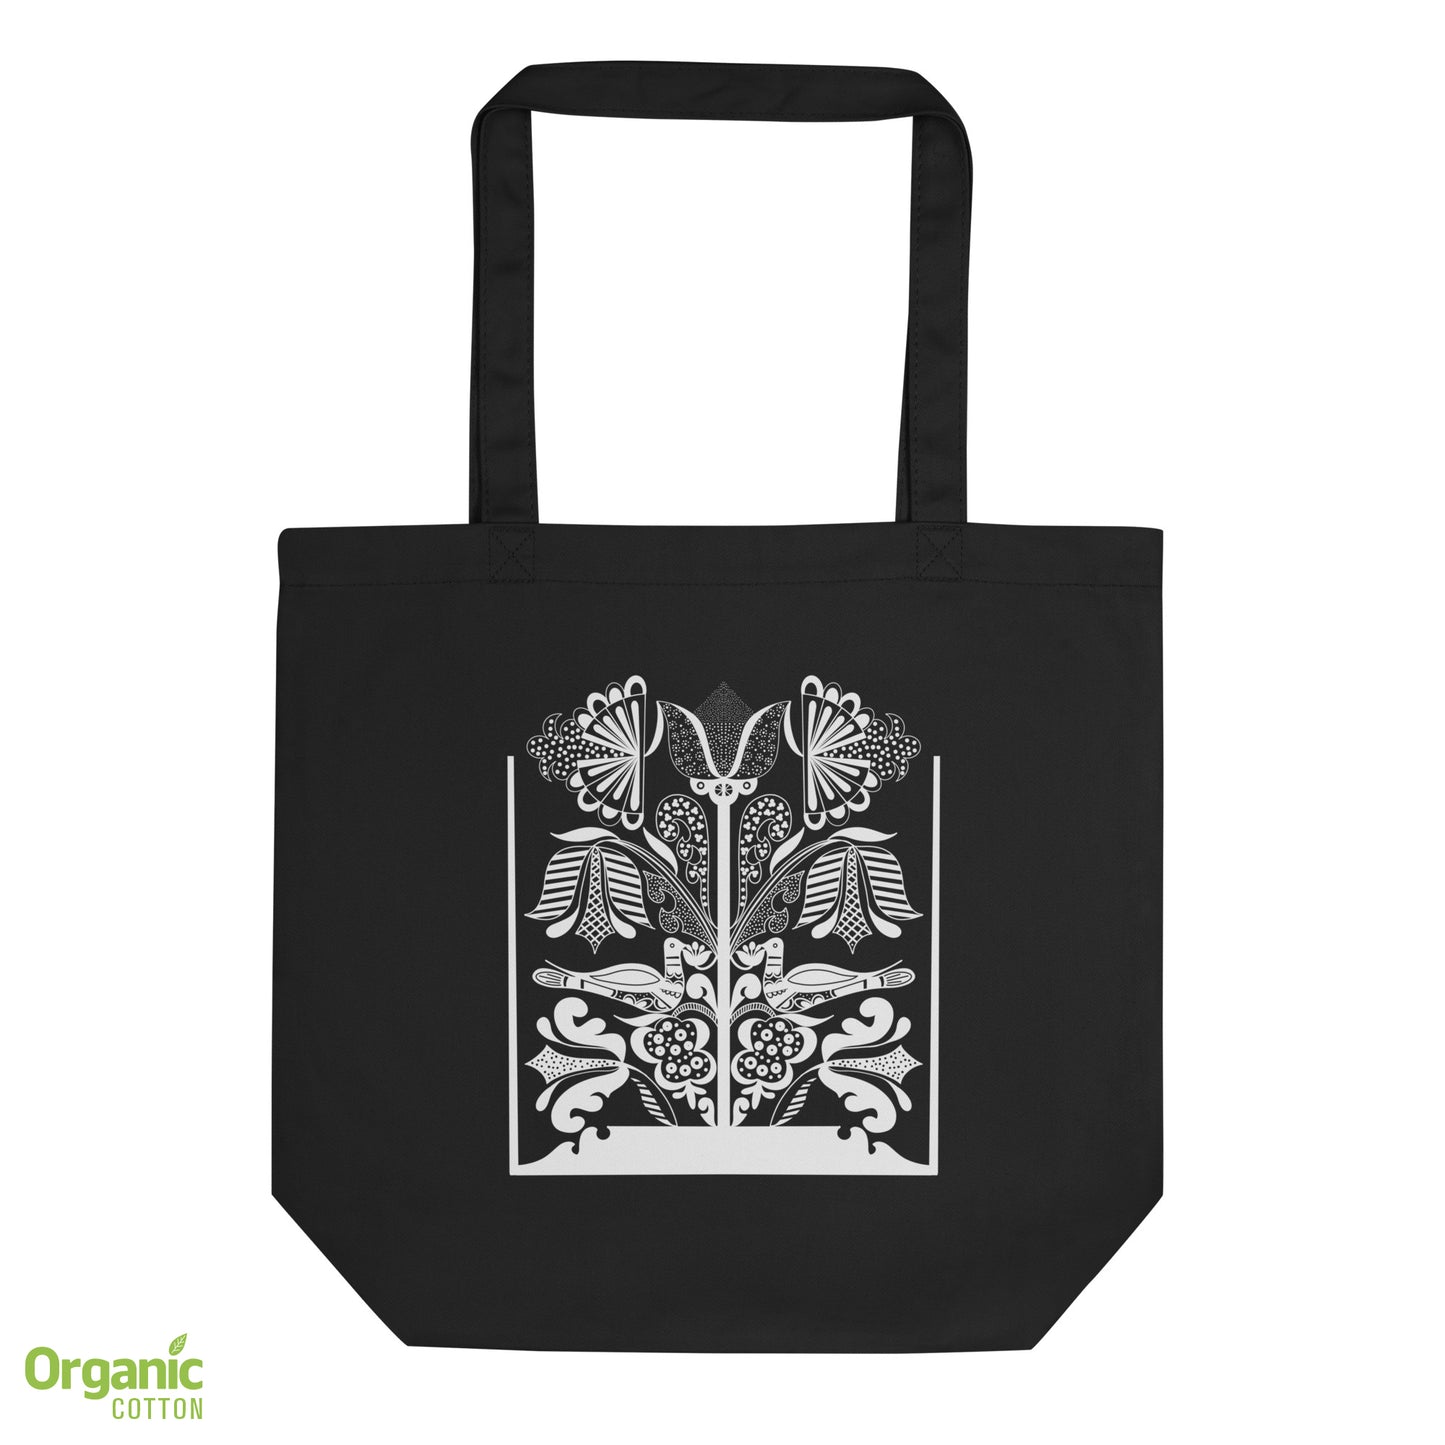 Lovely doves - Eco Tote Bag black with white print - Bags- Print N Stuff - [designed in Turku FInland]